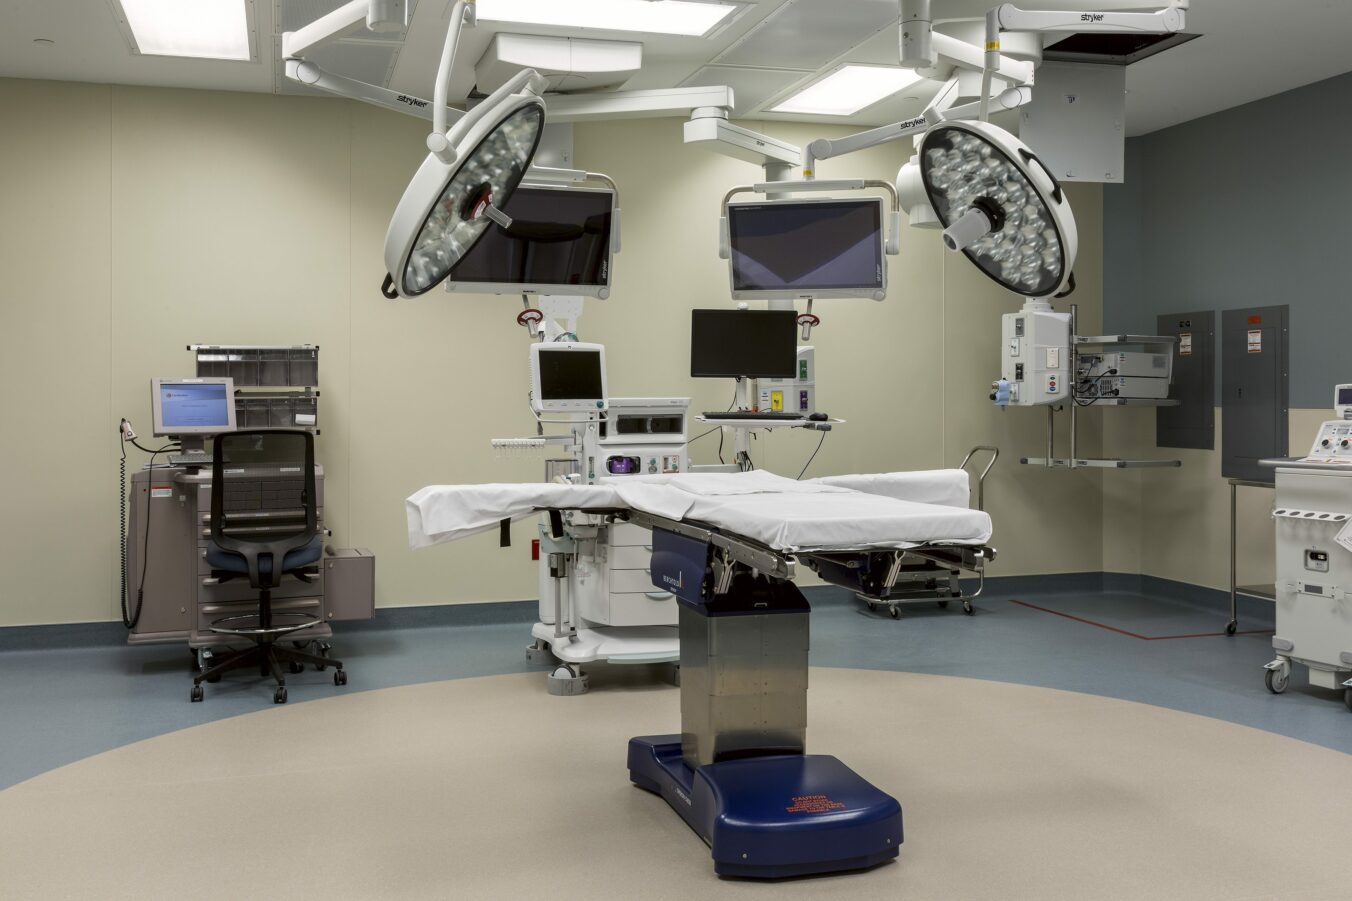 Empty operating table with surrounding medical equipment